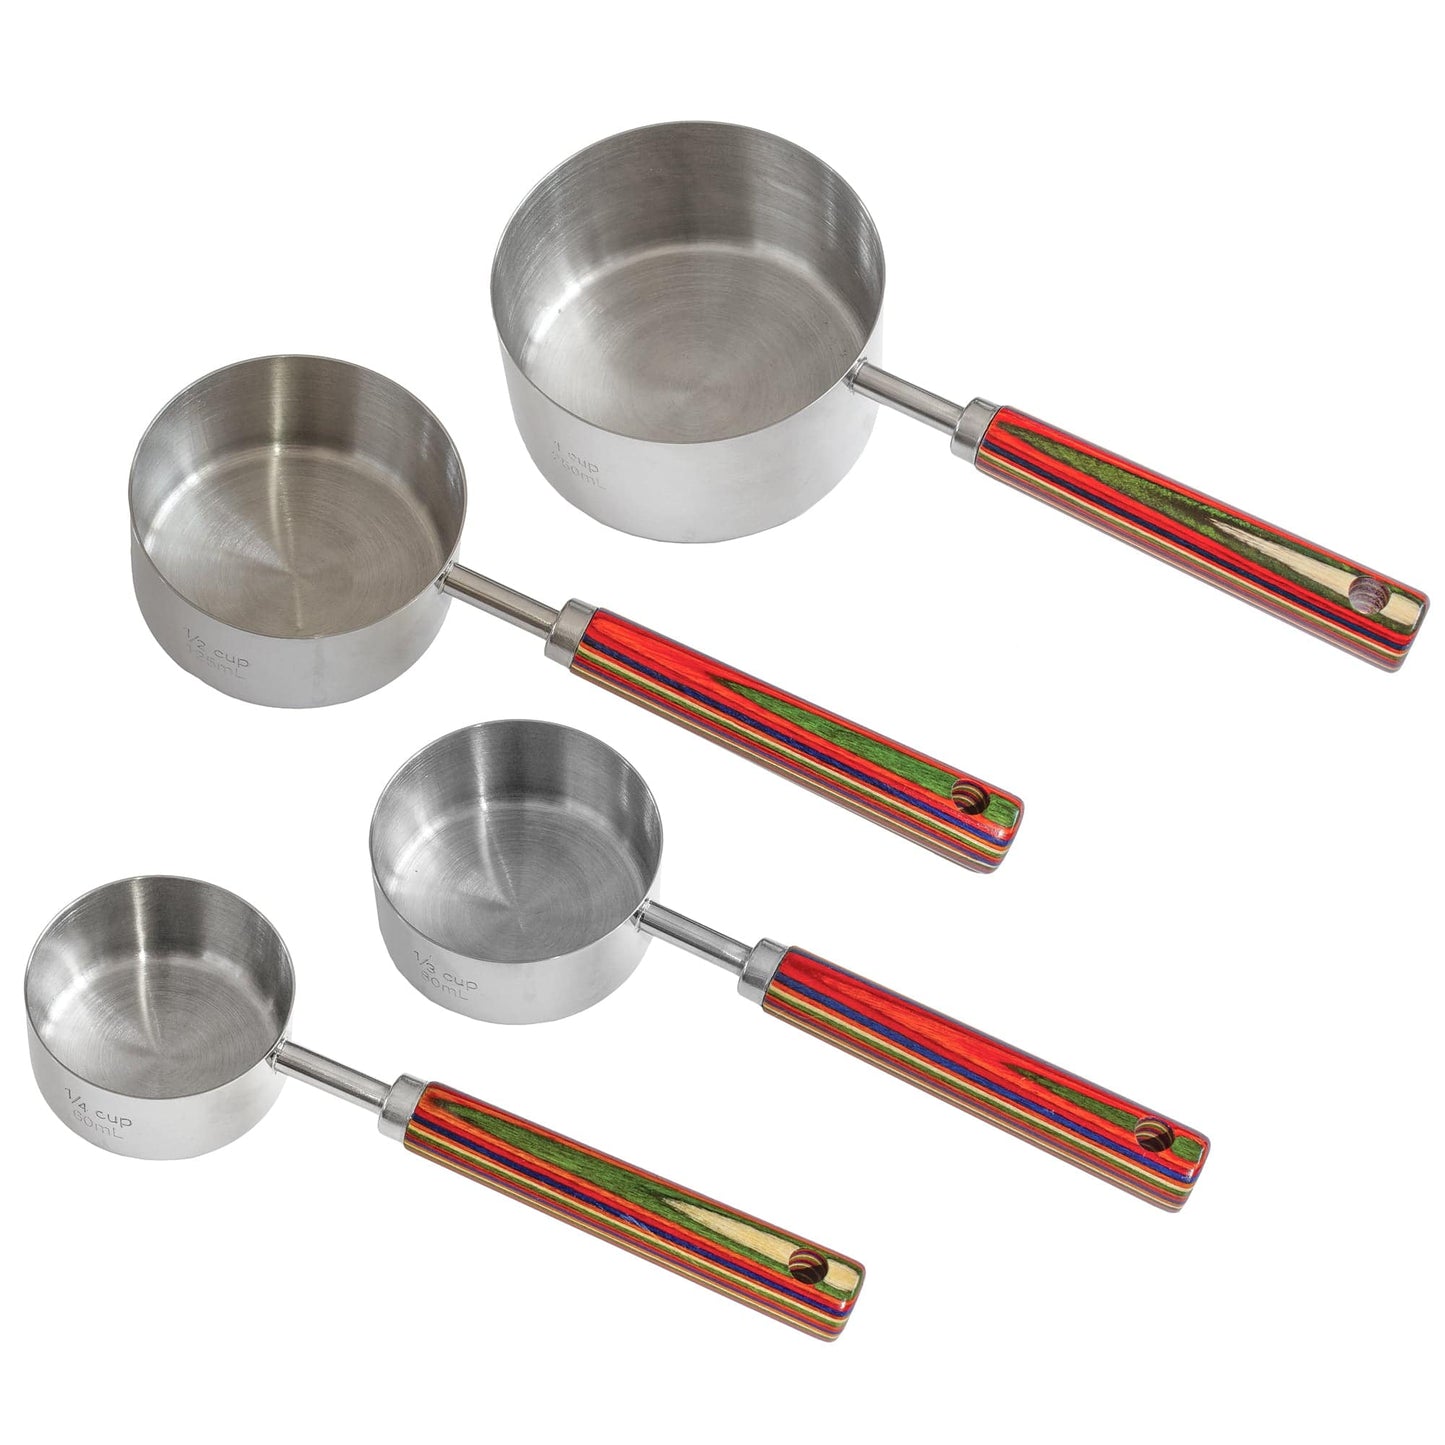 4 sizes of marrakesh measuring cups arranged on a white background.